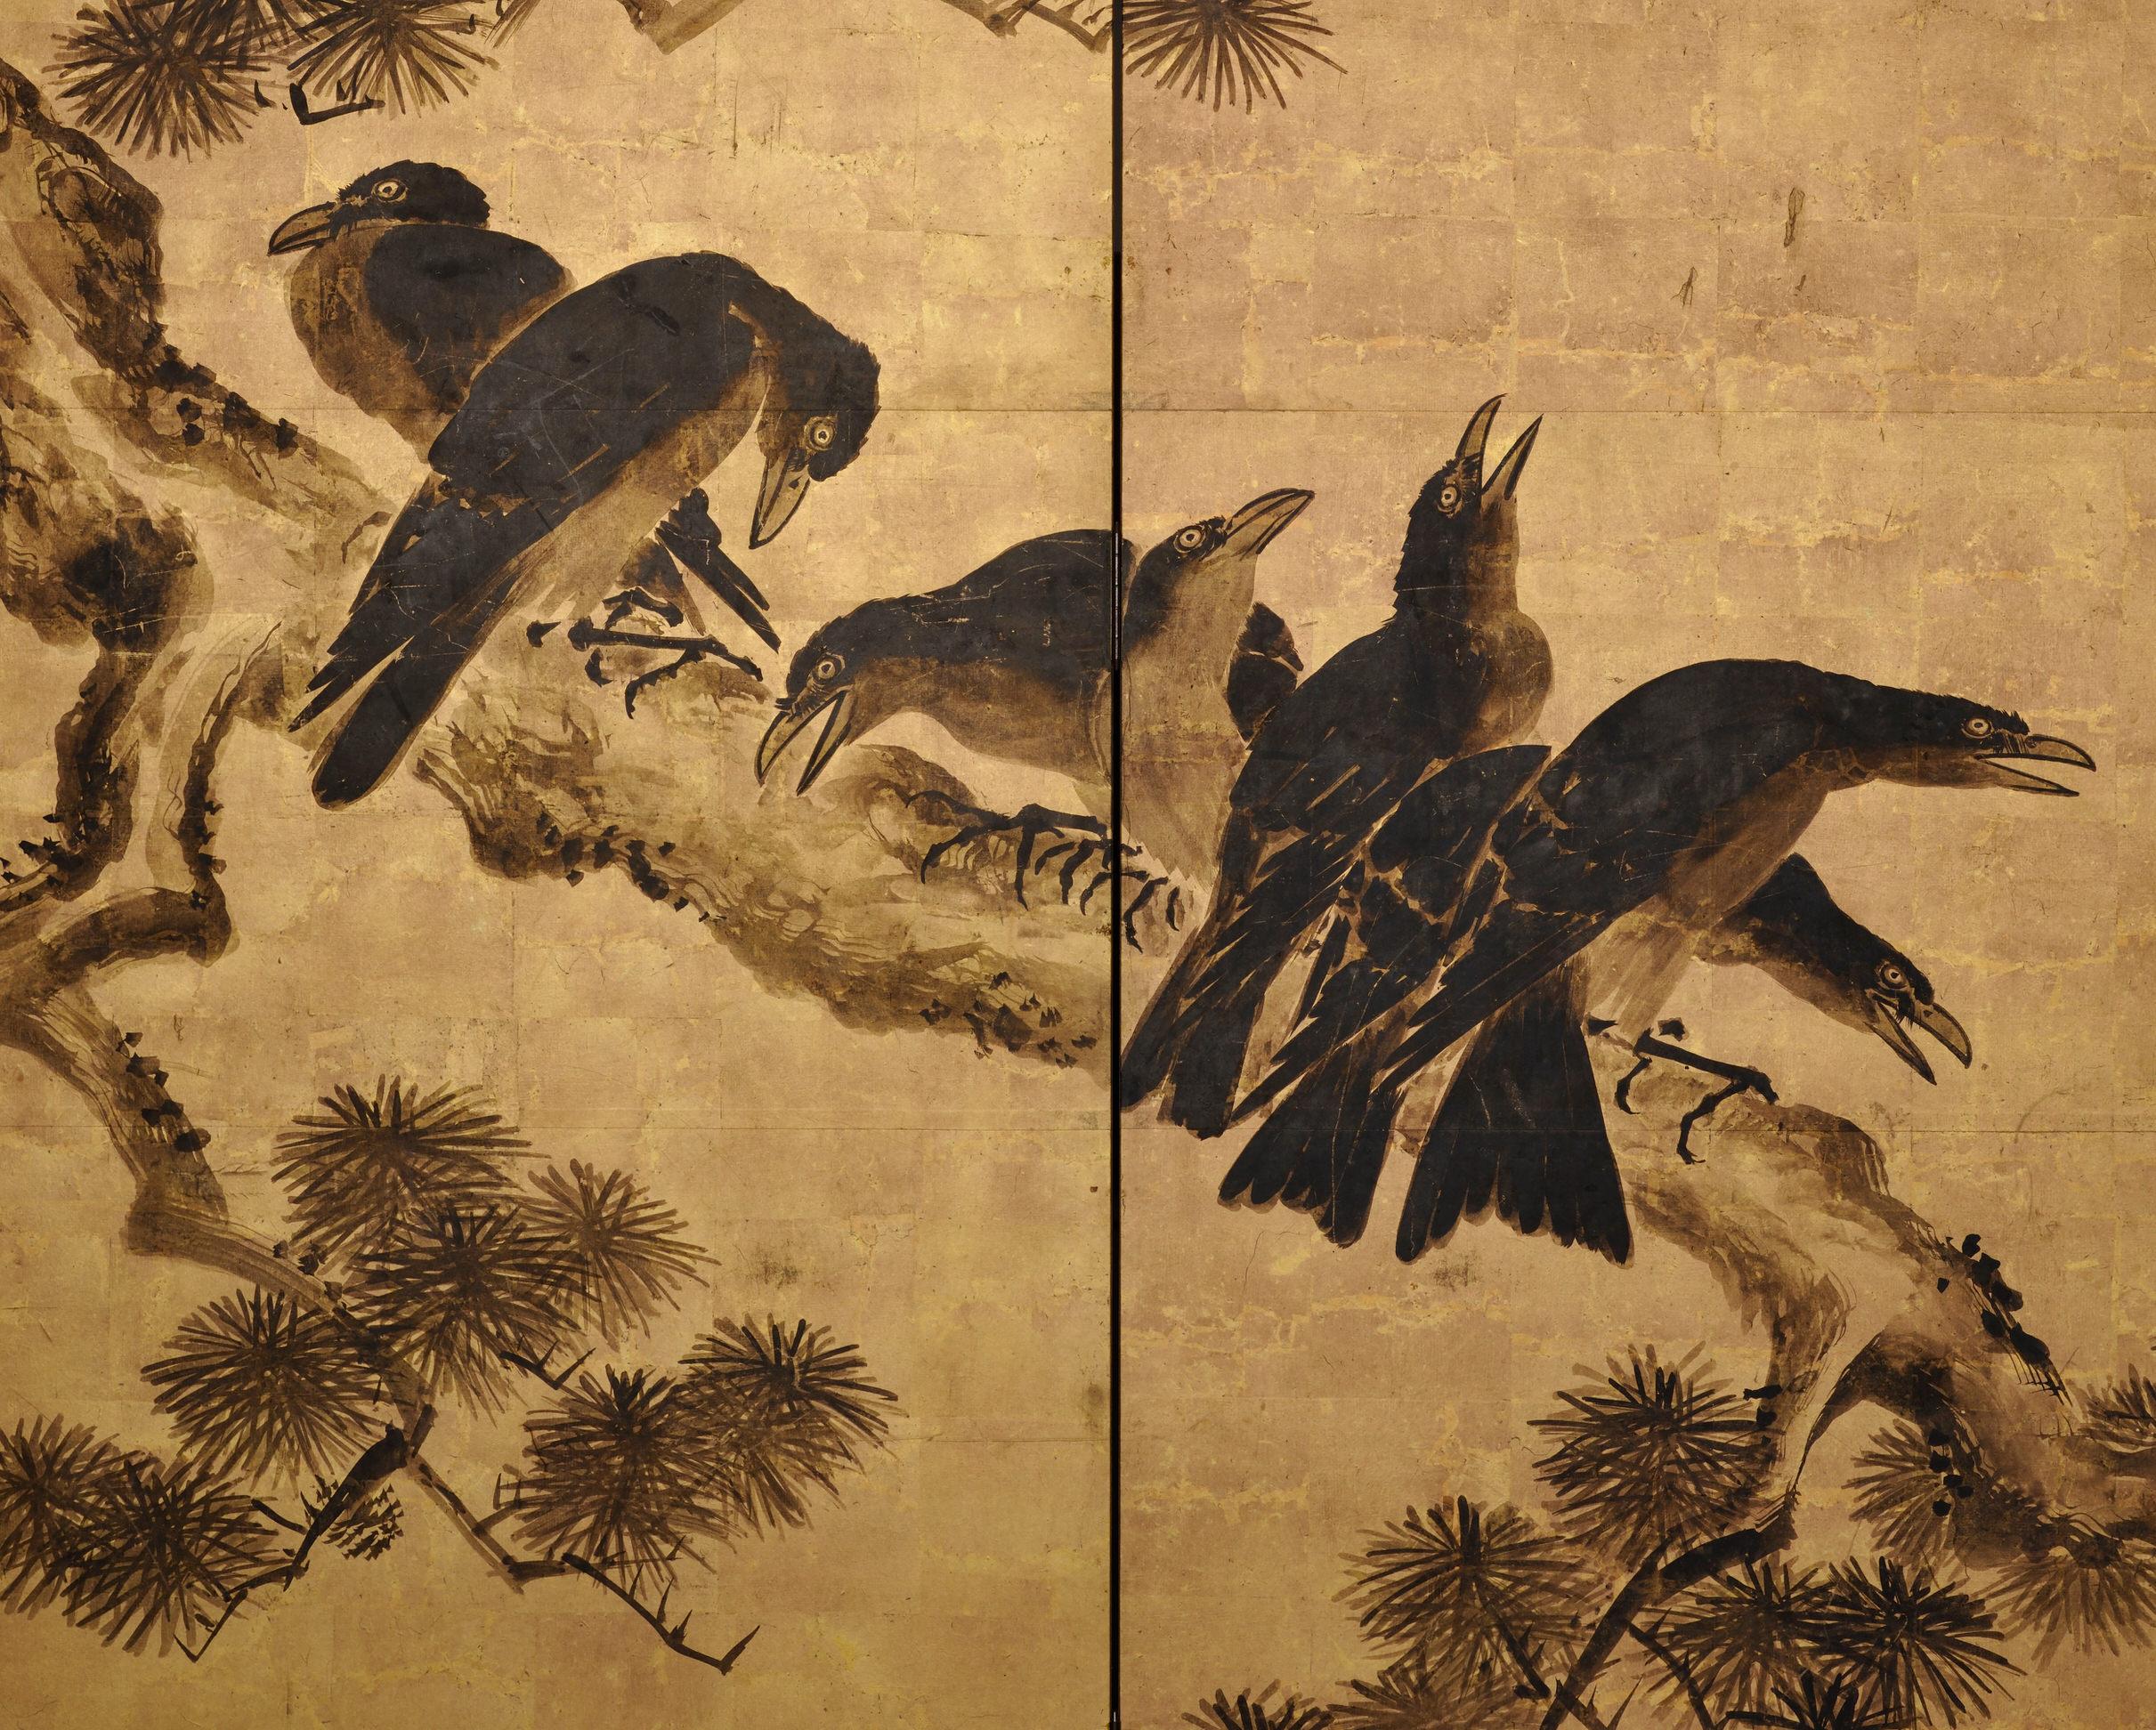 Kano Shushin Chikanobu (1660-1728)

'Crows and Pine’

Six-fold screen, ink and gold leaf on paper.

Haha-cho or mynah birds, whose forms resemble crows in artwork, were commonly depicted in Japanese art. These types of paintings were